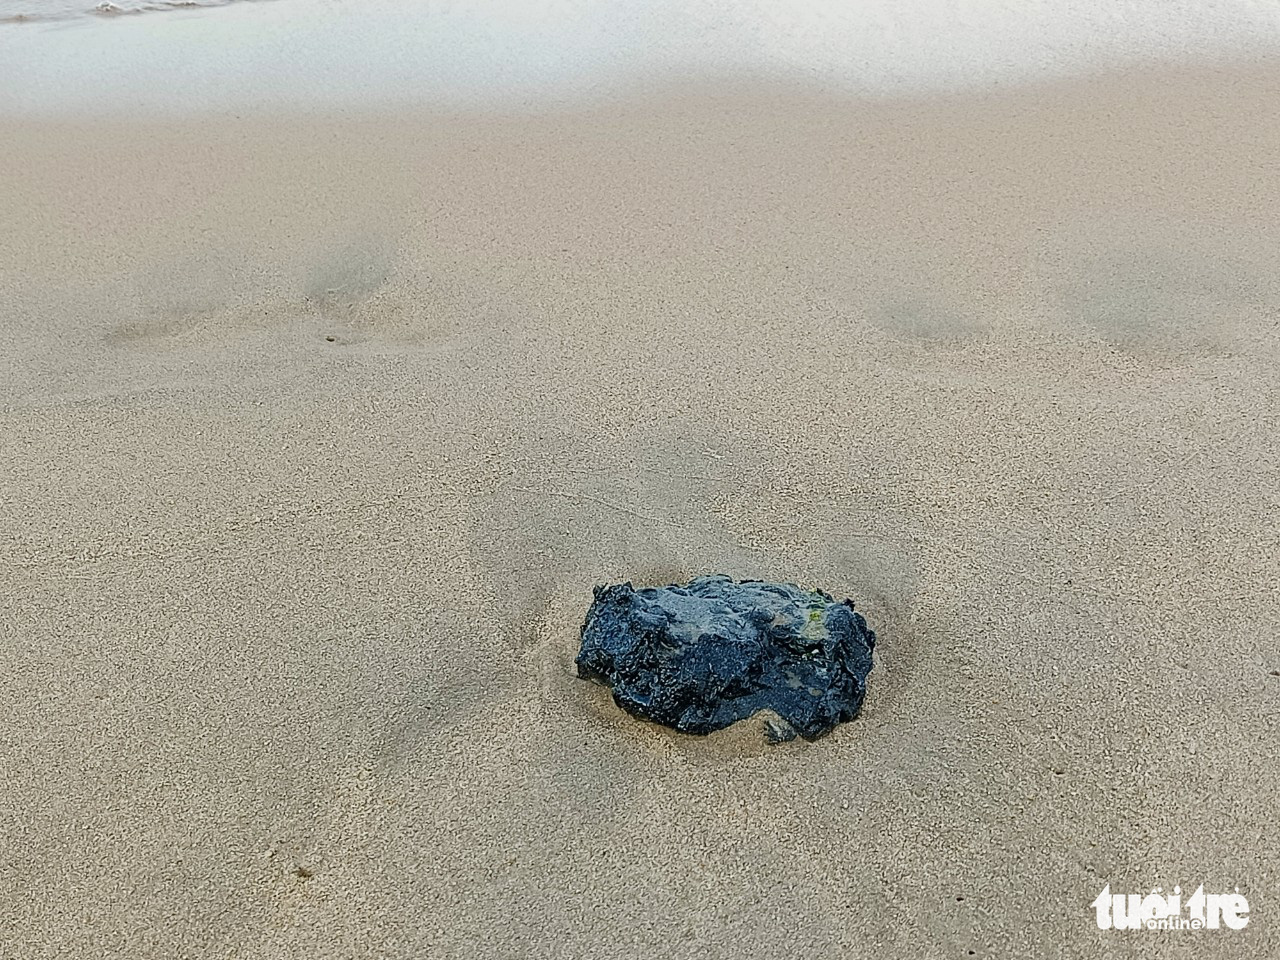 A crude oil mass of unknown origin appears on a beach in Nha Trang City, Khanh Hoa Province, Vietnam, March 17, 2022. Photo: Minh Chien / Tuoi Tre